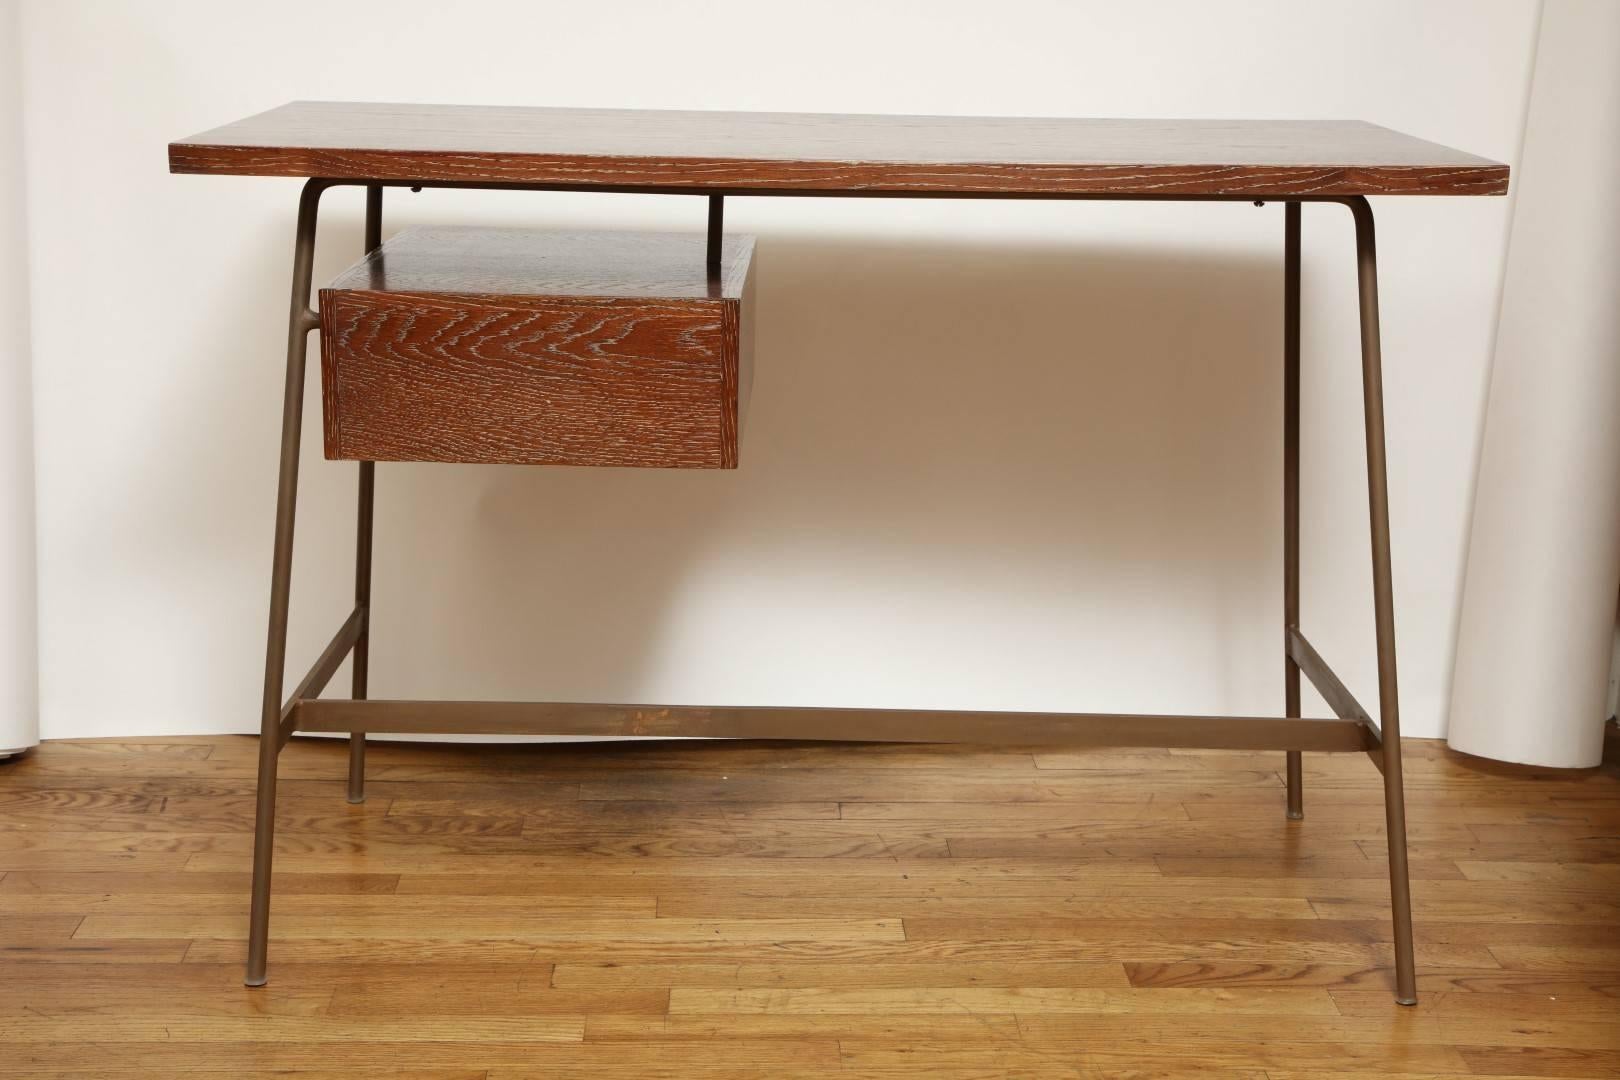 A new midcentury style cerused oak desk with floating drawer at right of the underside with original leather tab pull and supported by four splayed iron legs joined by H-shaped stretcher.